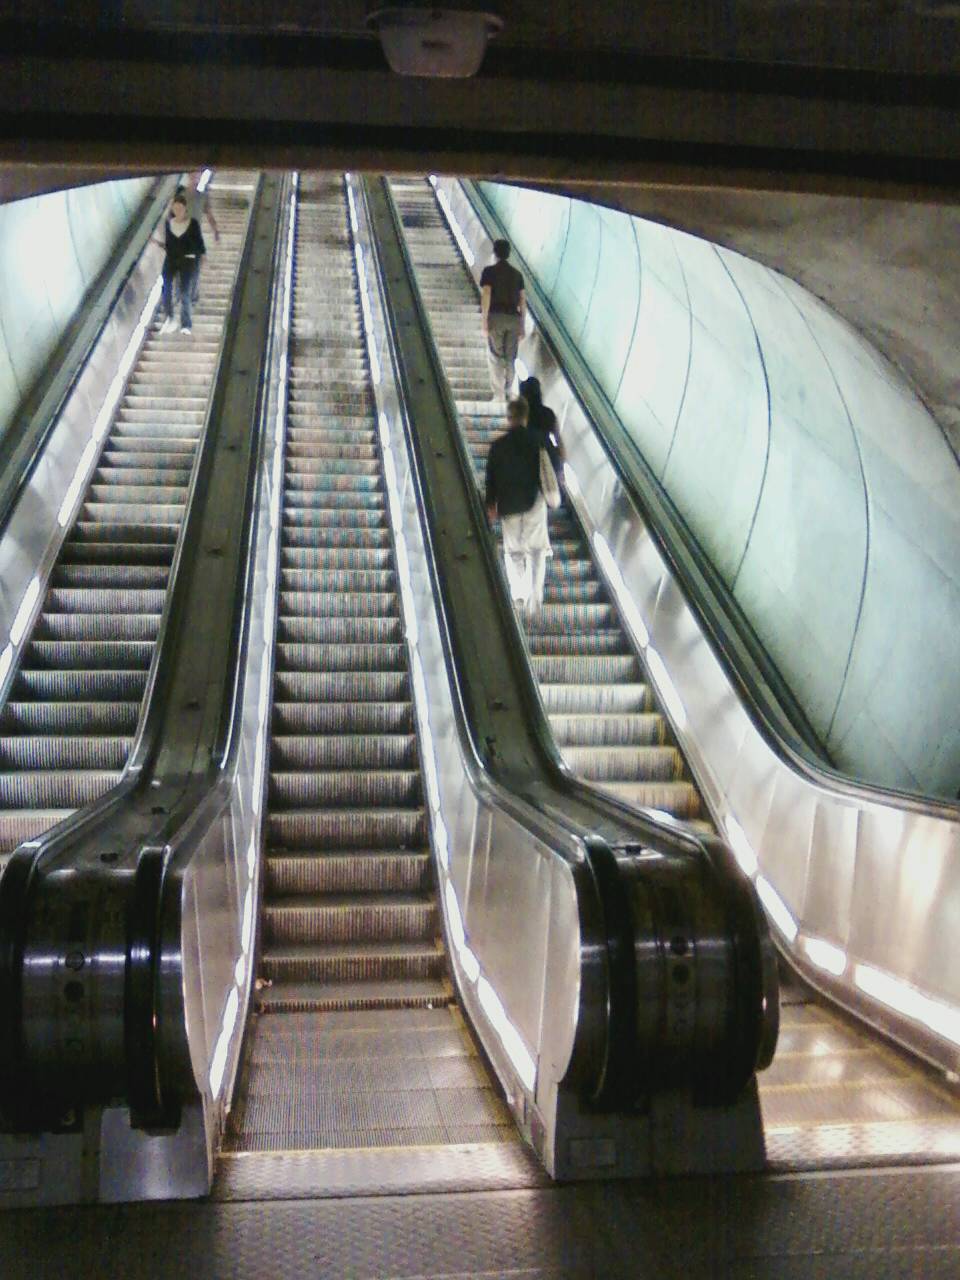 08/24/2011- WMATA/DC
Metro, out of service escalators at DuPont Circle station's southbound
entrance. As of November 2012, there has been much repair work done which
has corrected this issue. For further details, please visit
www.wirelessnotes.org.